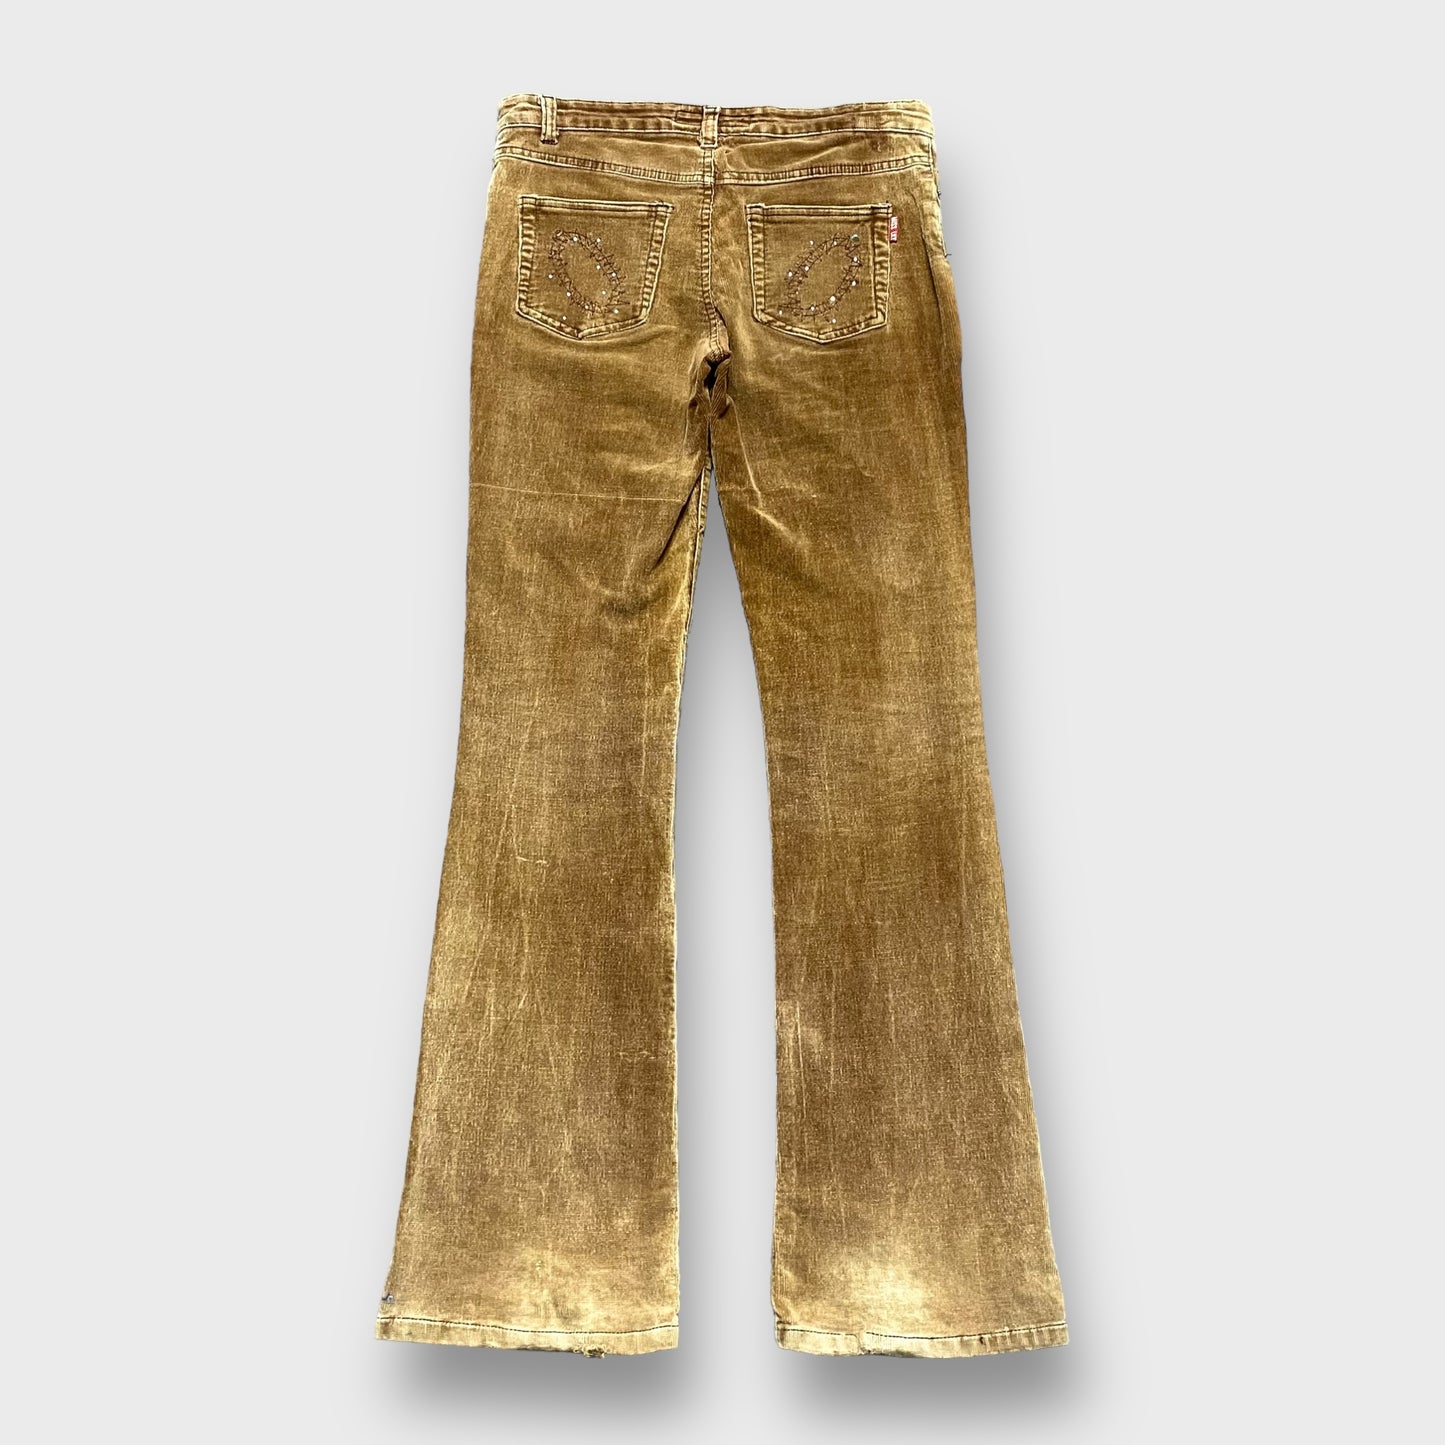 "MISS LILY" Corduroy flare pants